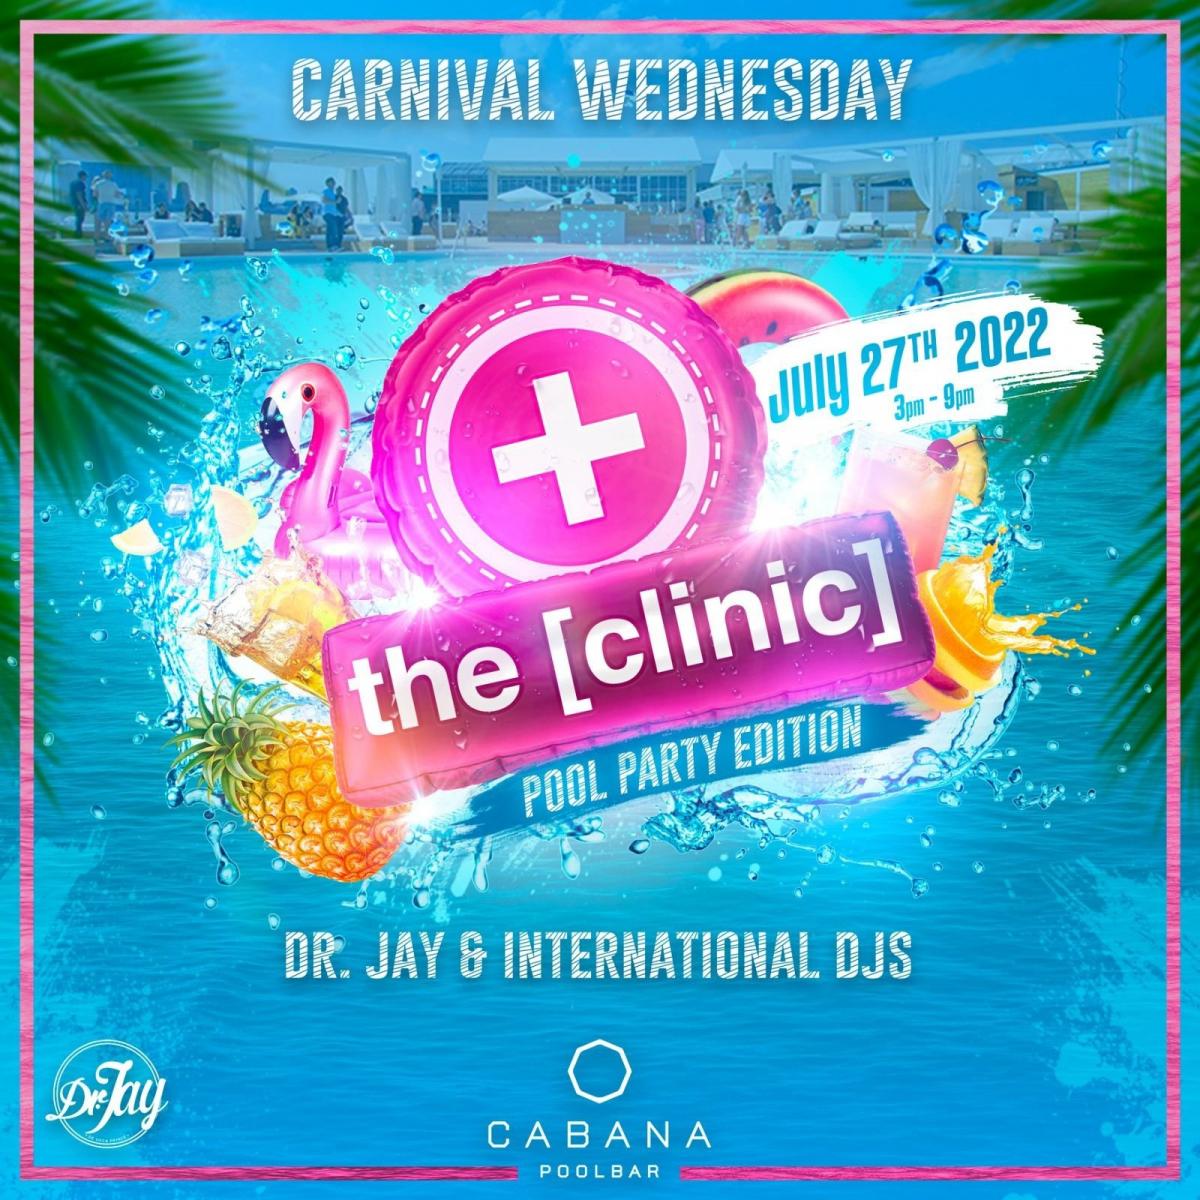 The Clinic - Pool Party Edition flyer or graphic.